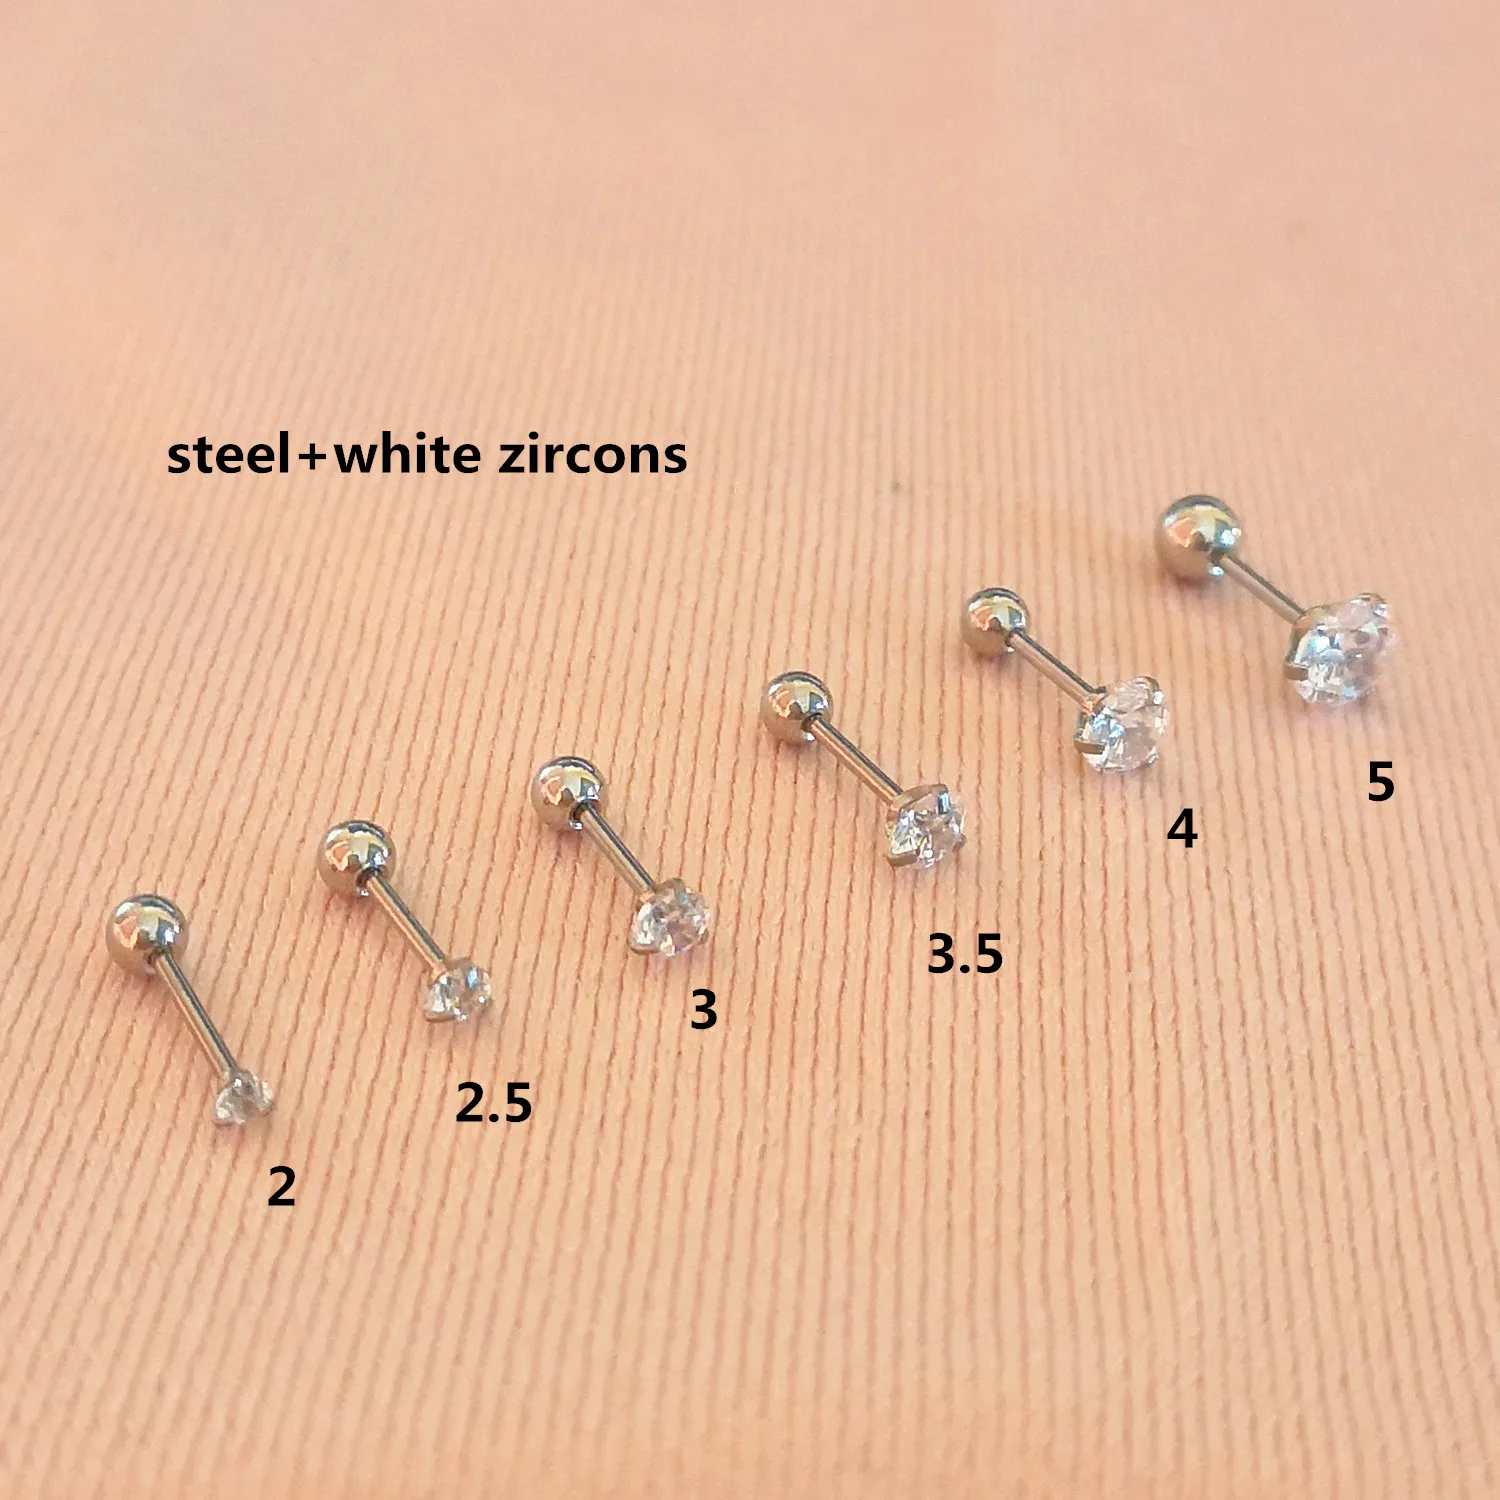 

1 Pc Stainless Steel White Zircons Screw-back Stud Earrings Slim Ear Needle 0.8*6MM 6 Size For Choose No Fade Allergy Free